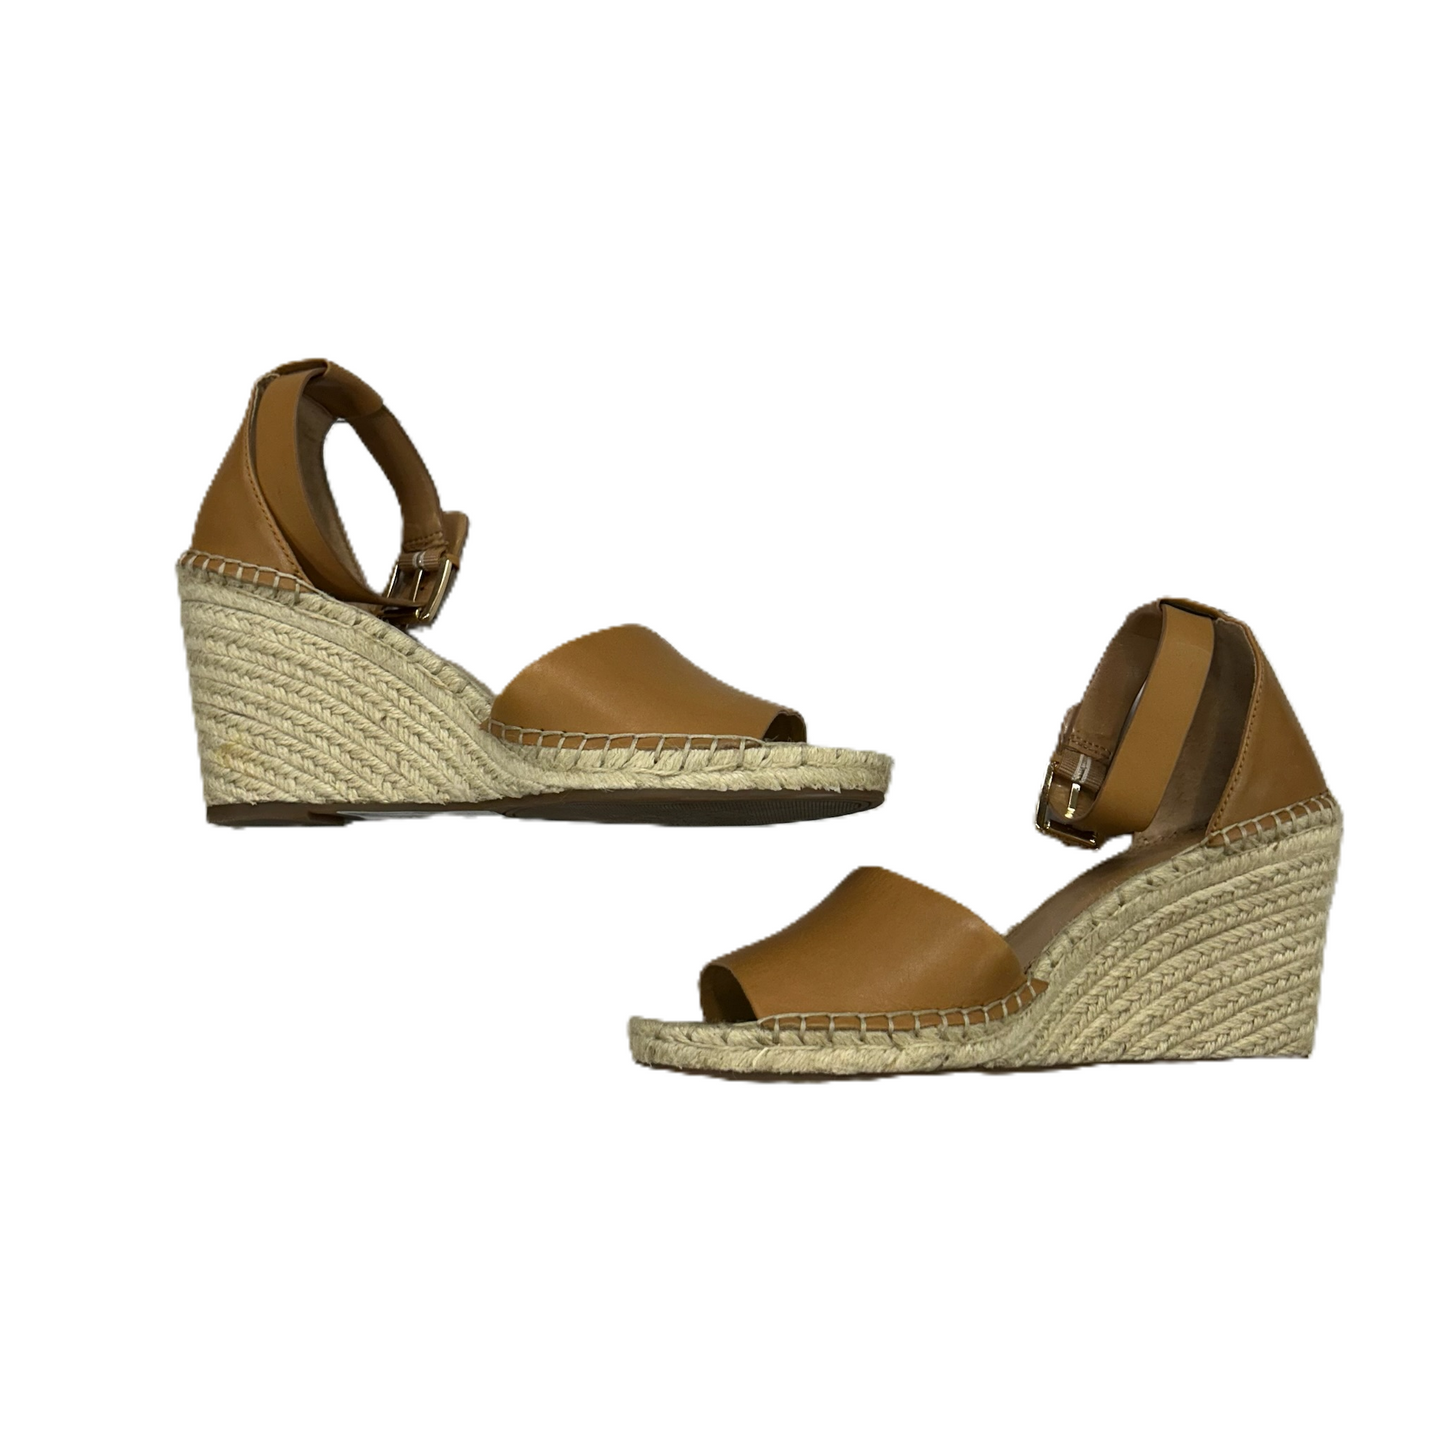 Brown Sandals Heels Wedge By Vince Camuto, Size: 11